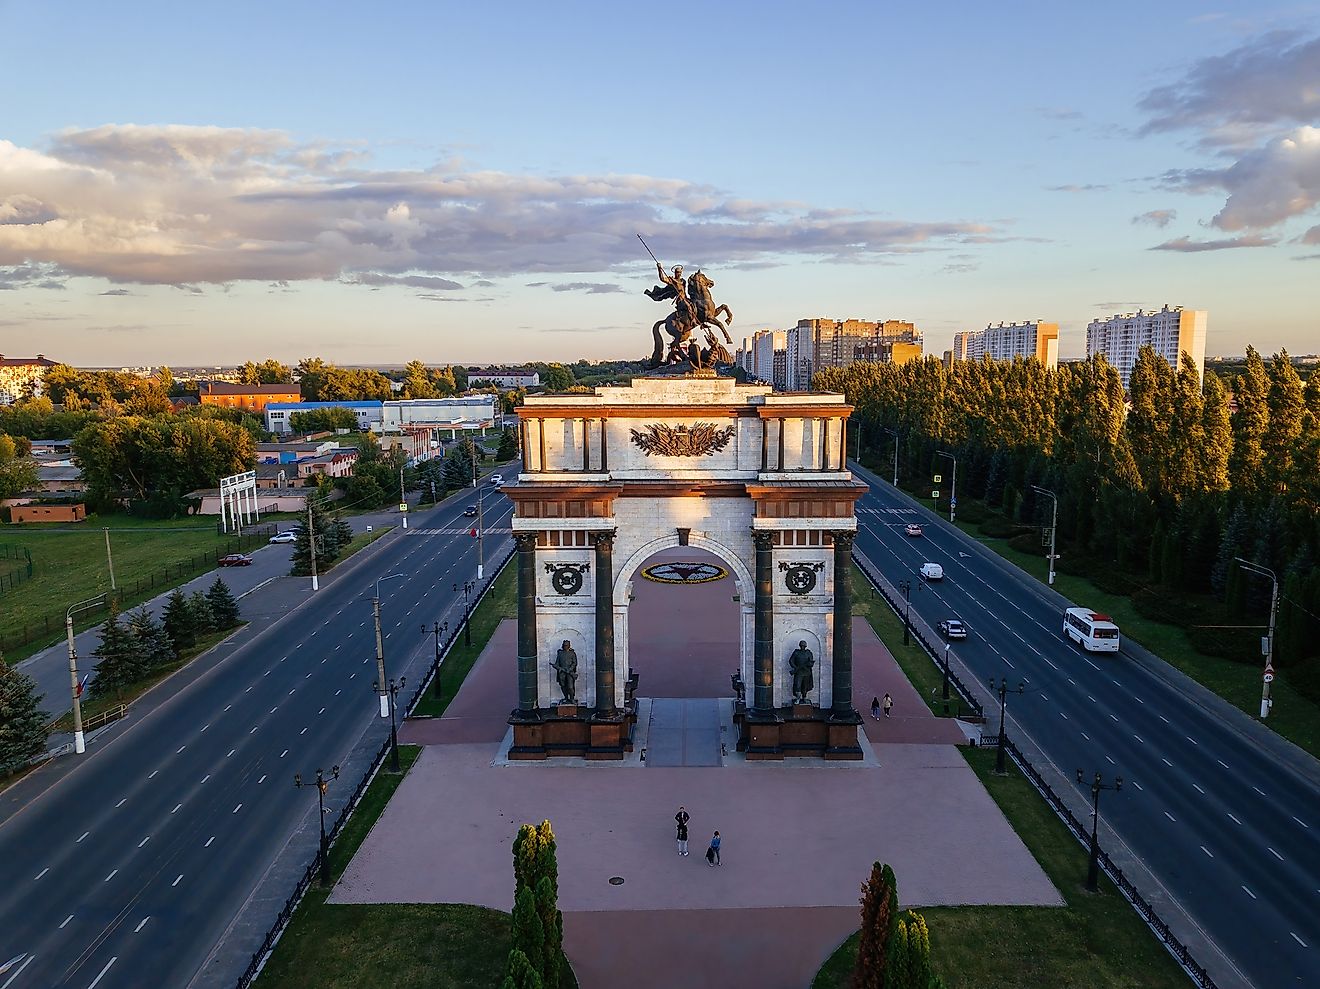 The Triumphal Arch in Kursk, Russia